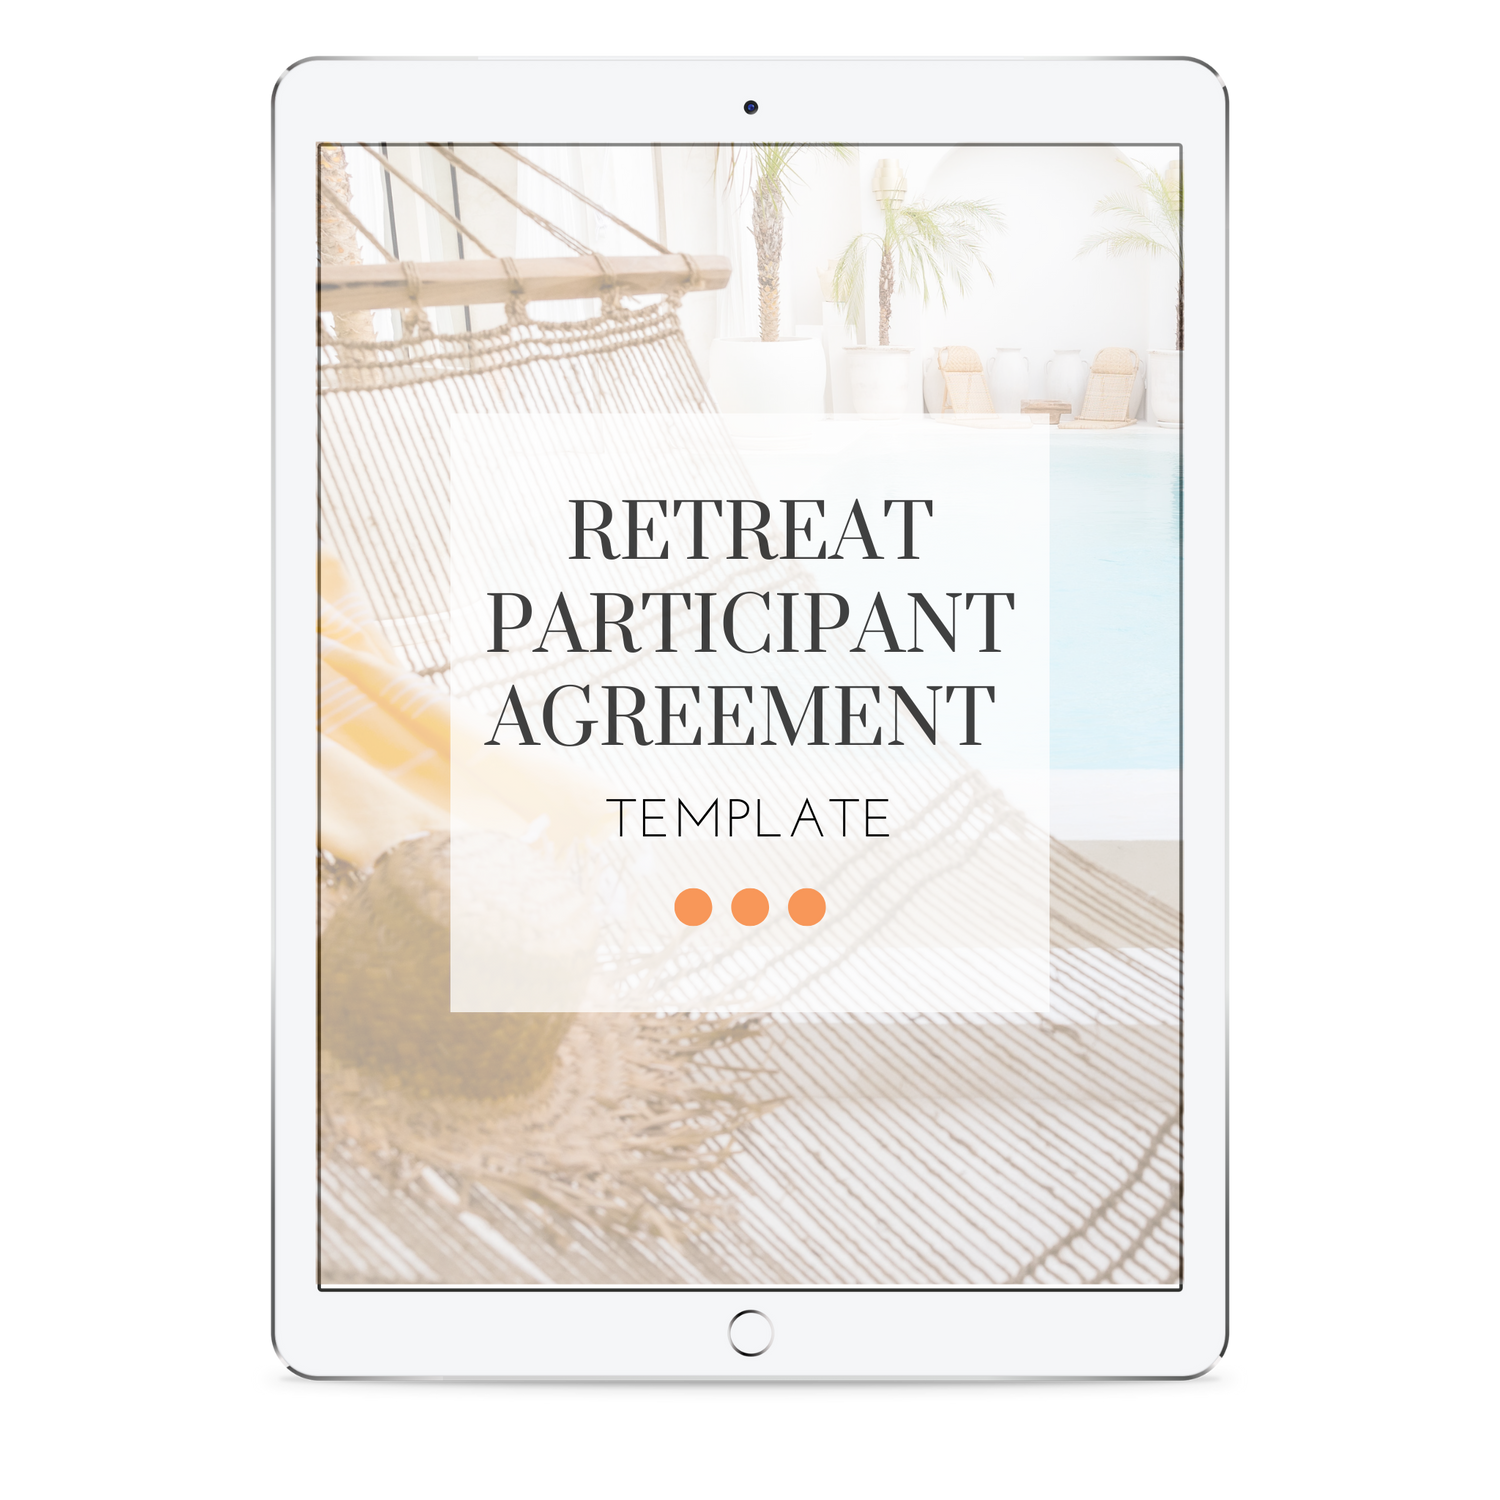 Retreat Waiver, Release, &amp; Liability